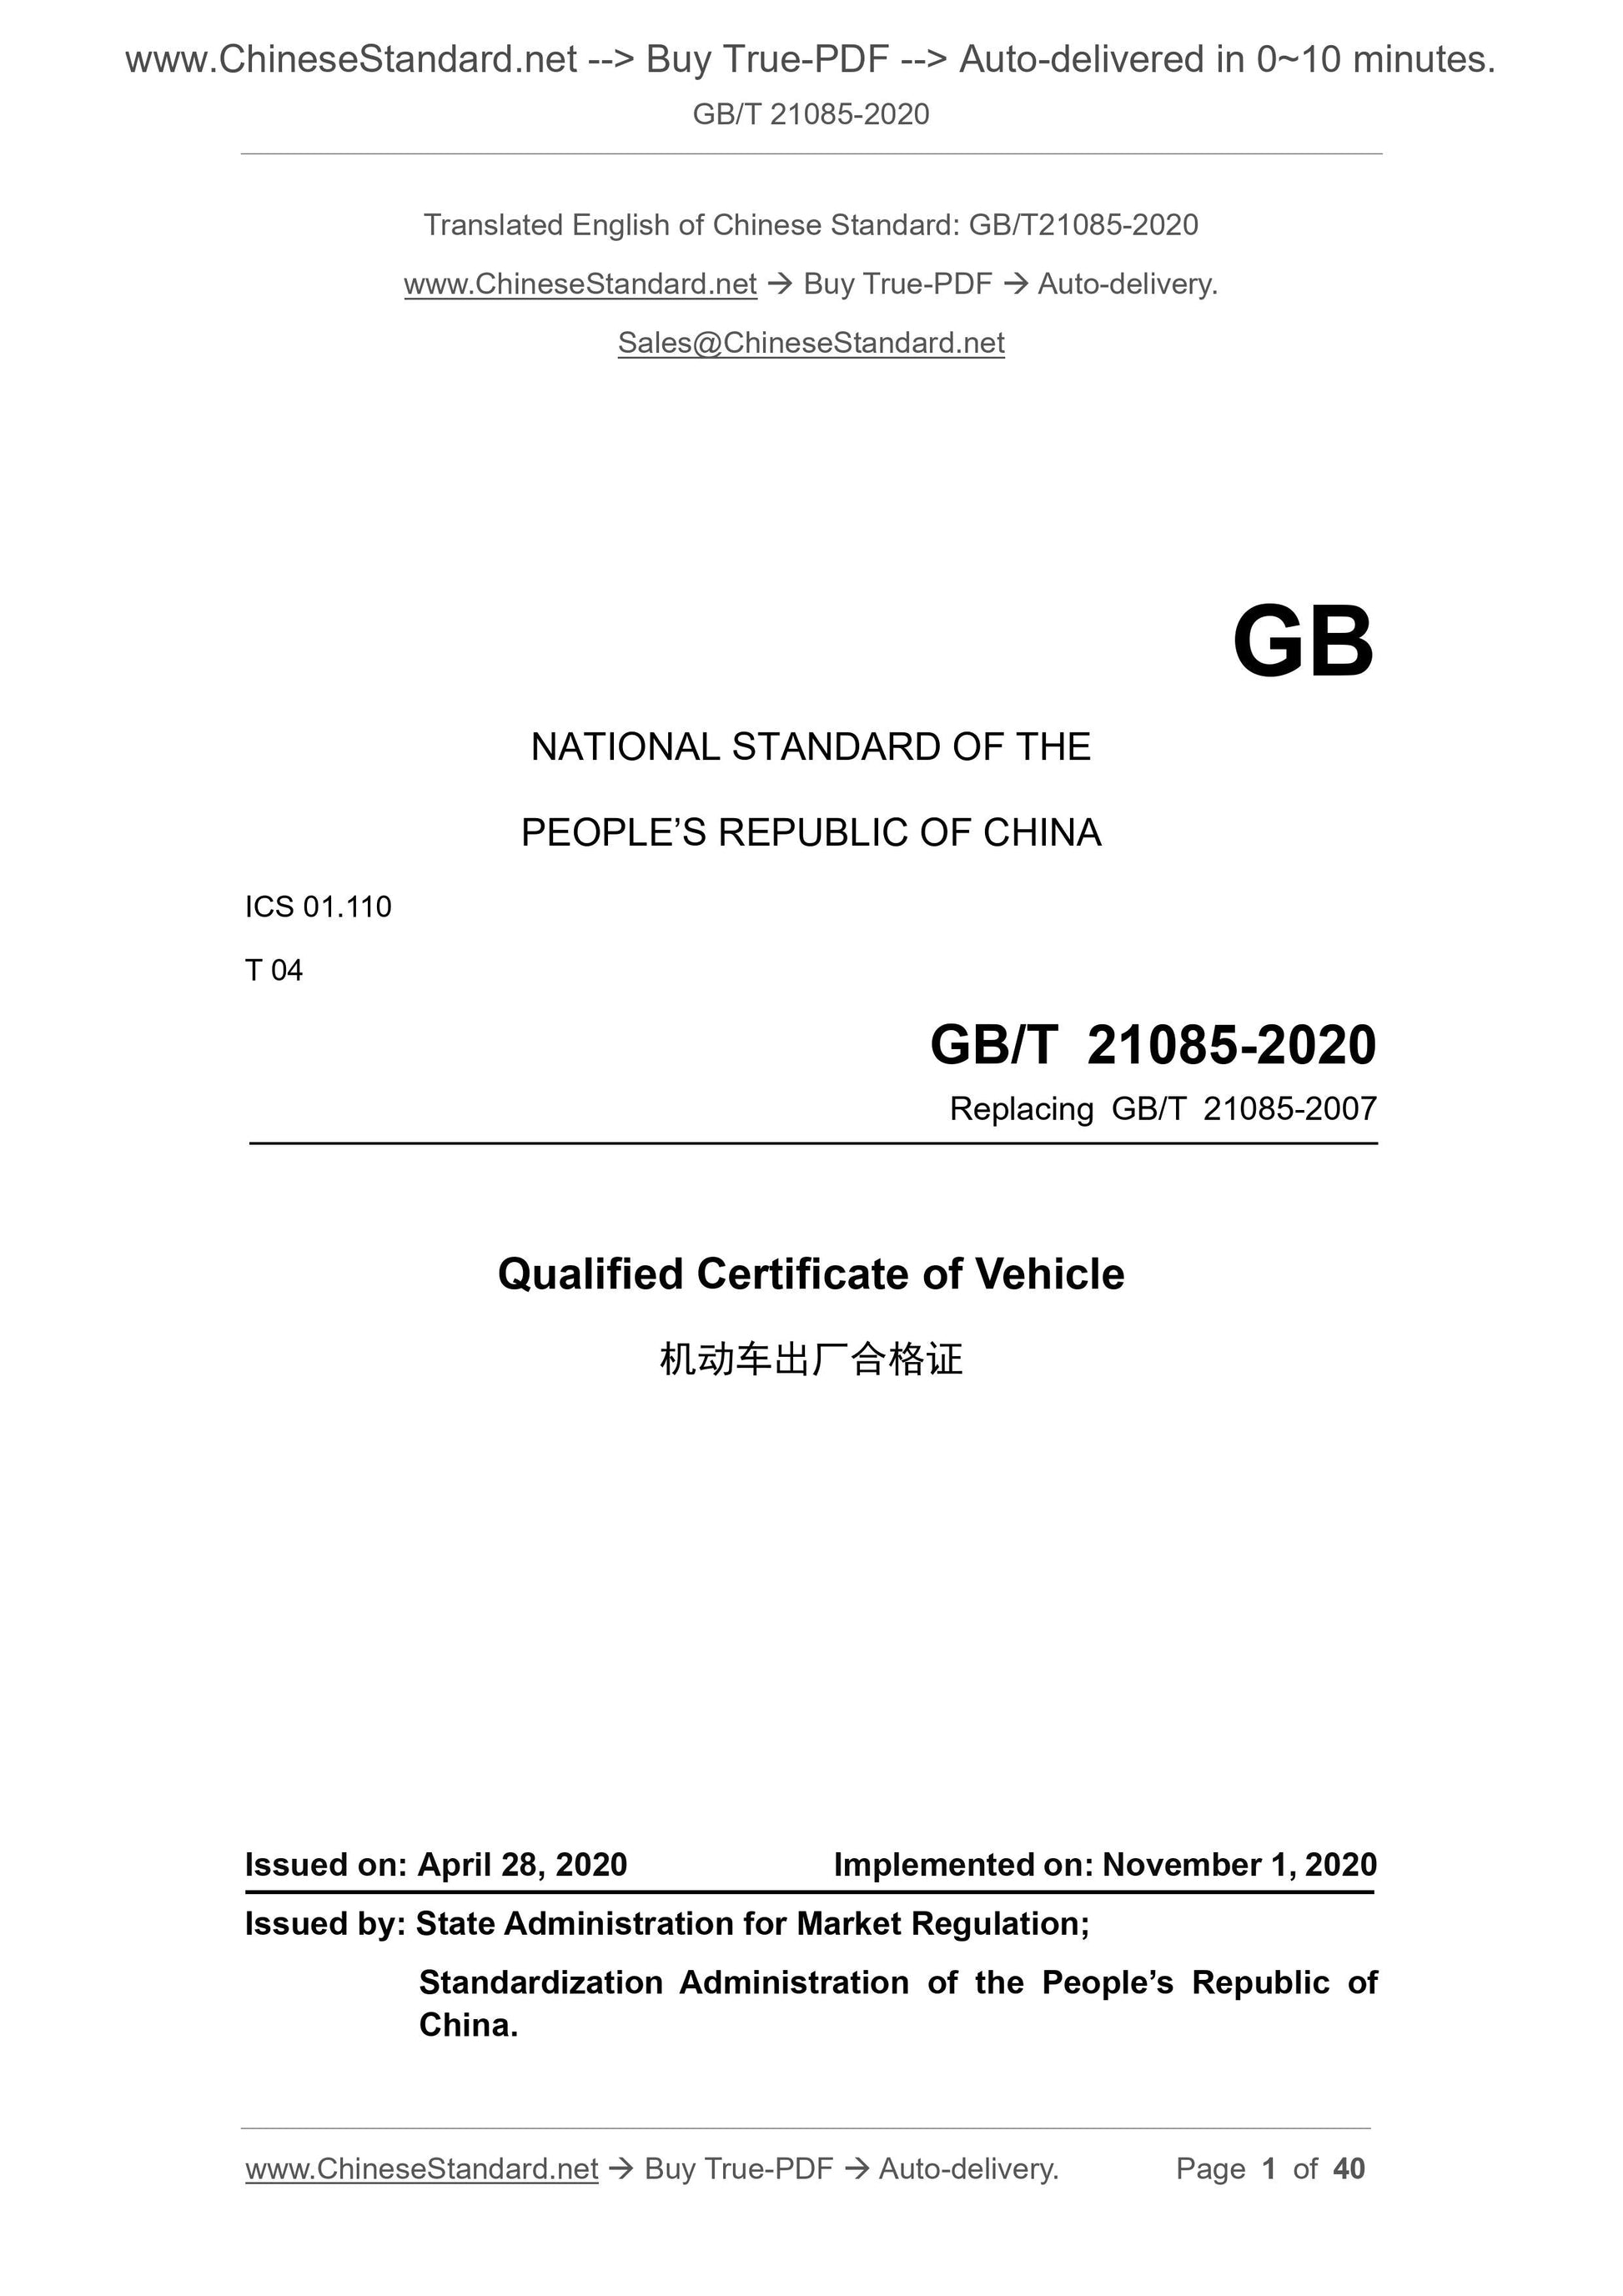 GB/T 21085-2020 Page 1